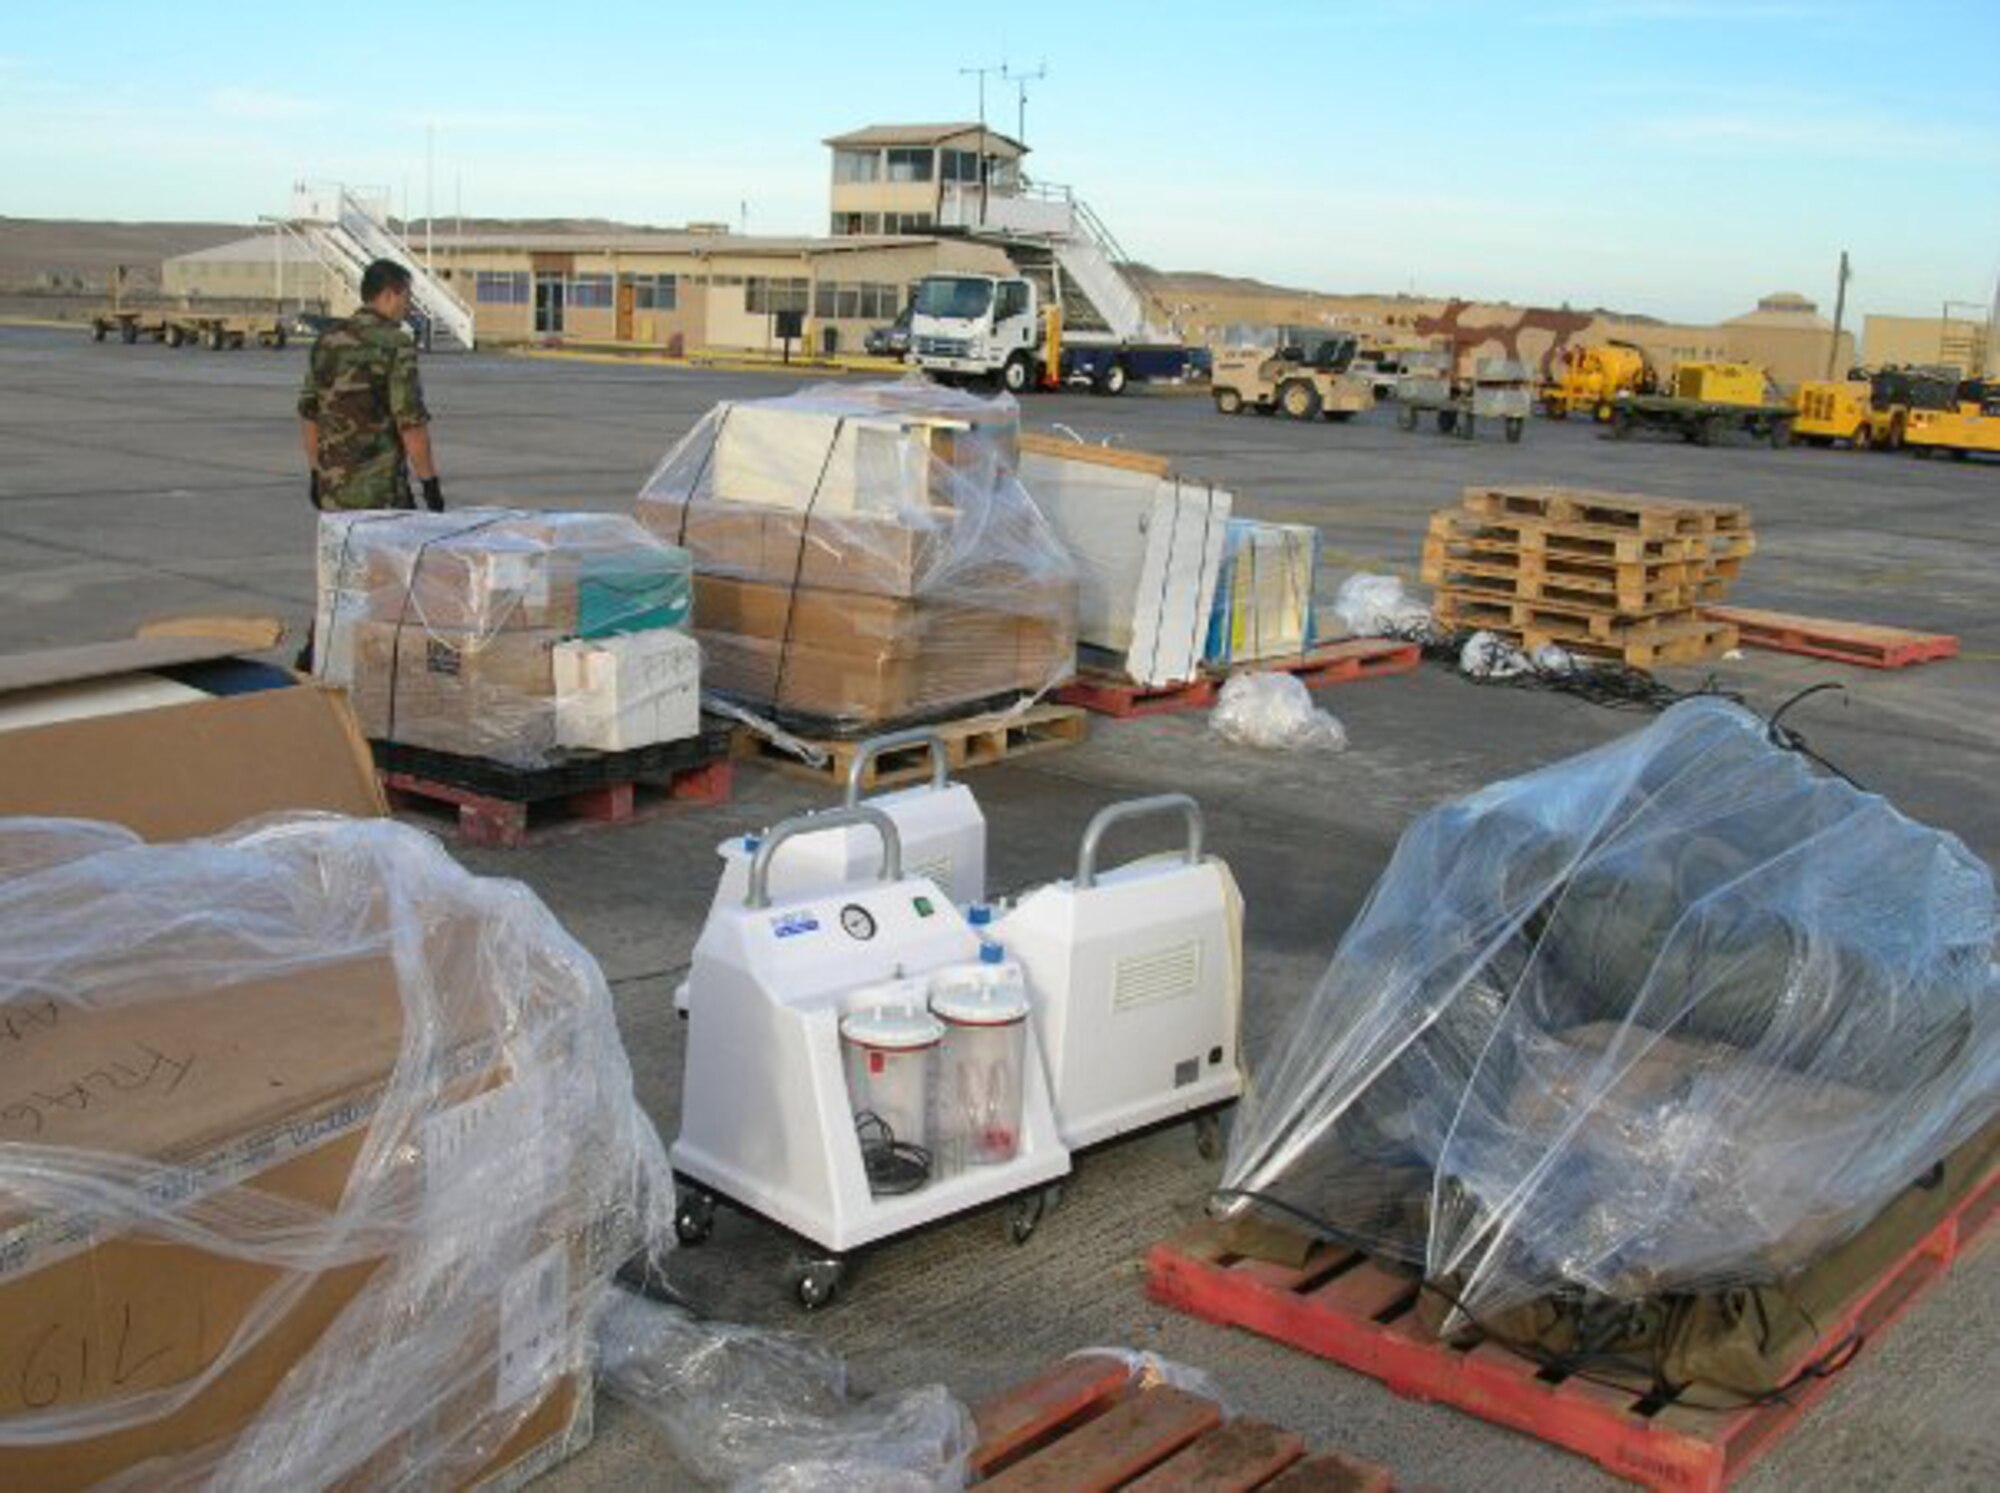 Several pallets of medical supplies sit on the runway of the airport in Santiago, Chile. Utah Air National Guard crews prepare to transport the supplies to locations throughout the country in support of earthquake humanitarian operations. U.S. Air Force photo by Lt. Col. Boyd Badali